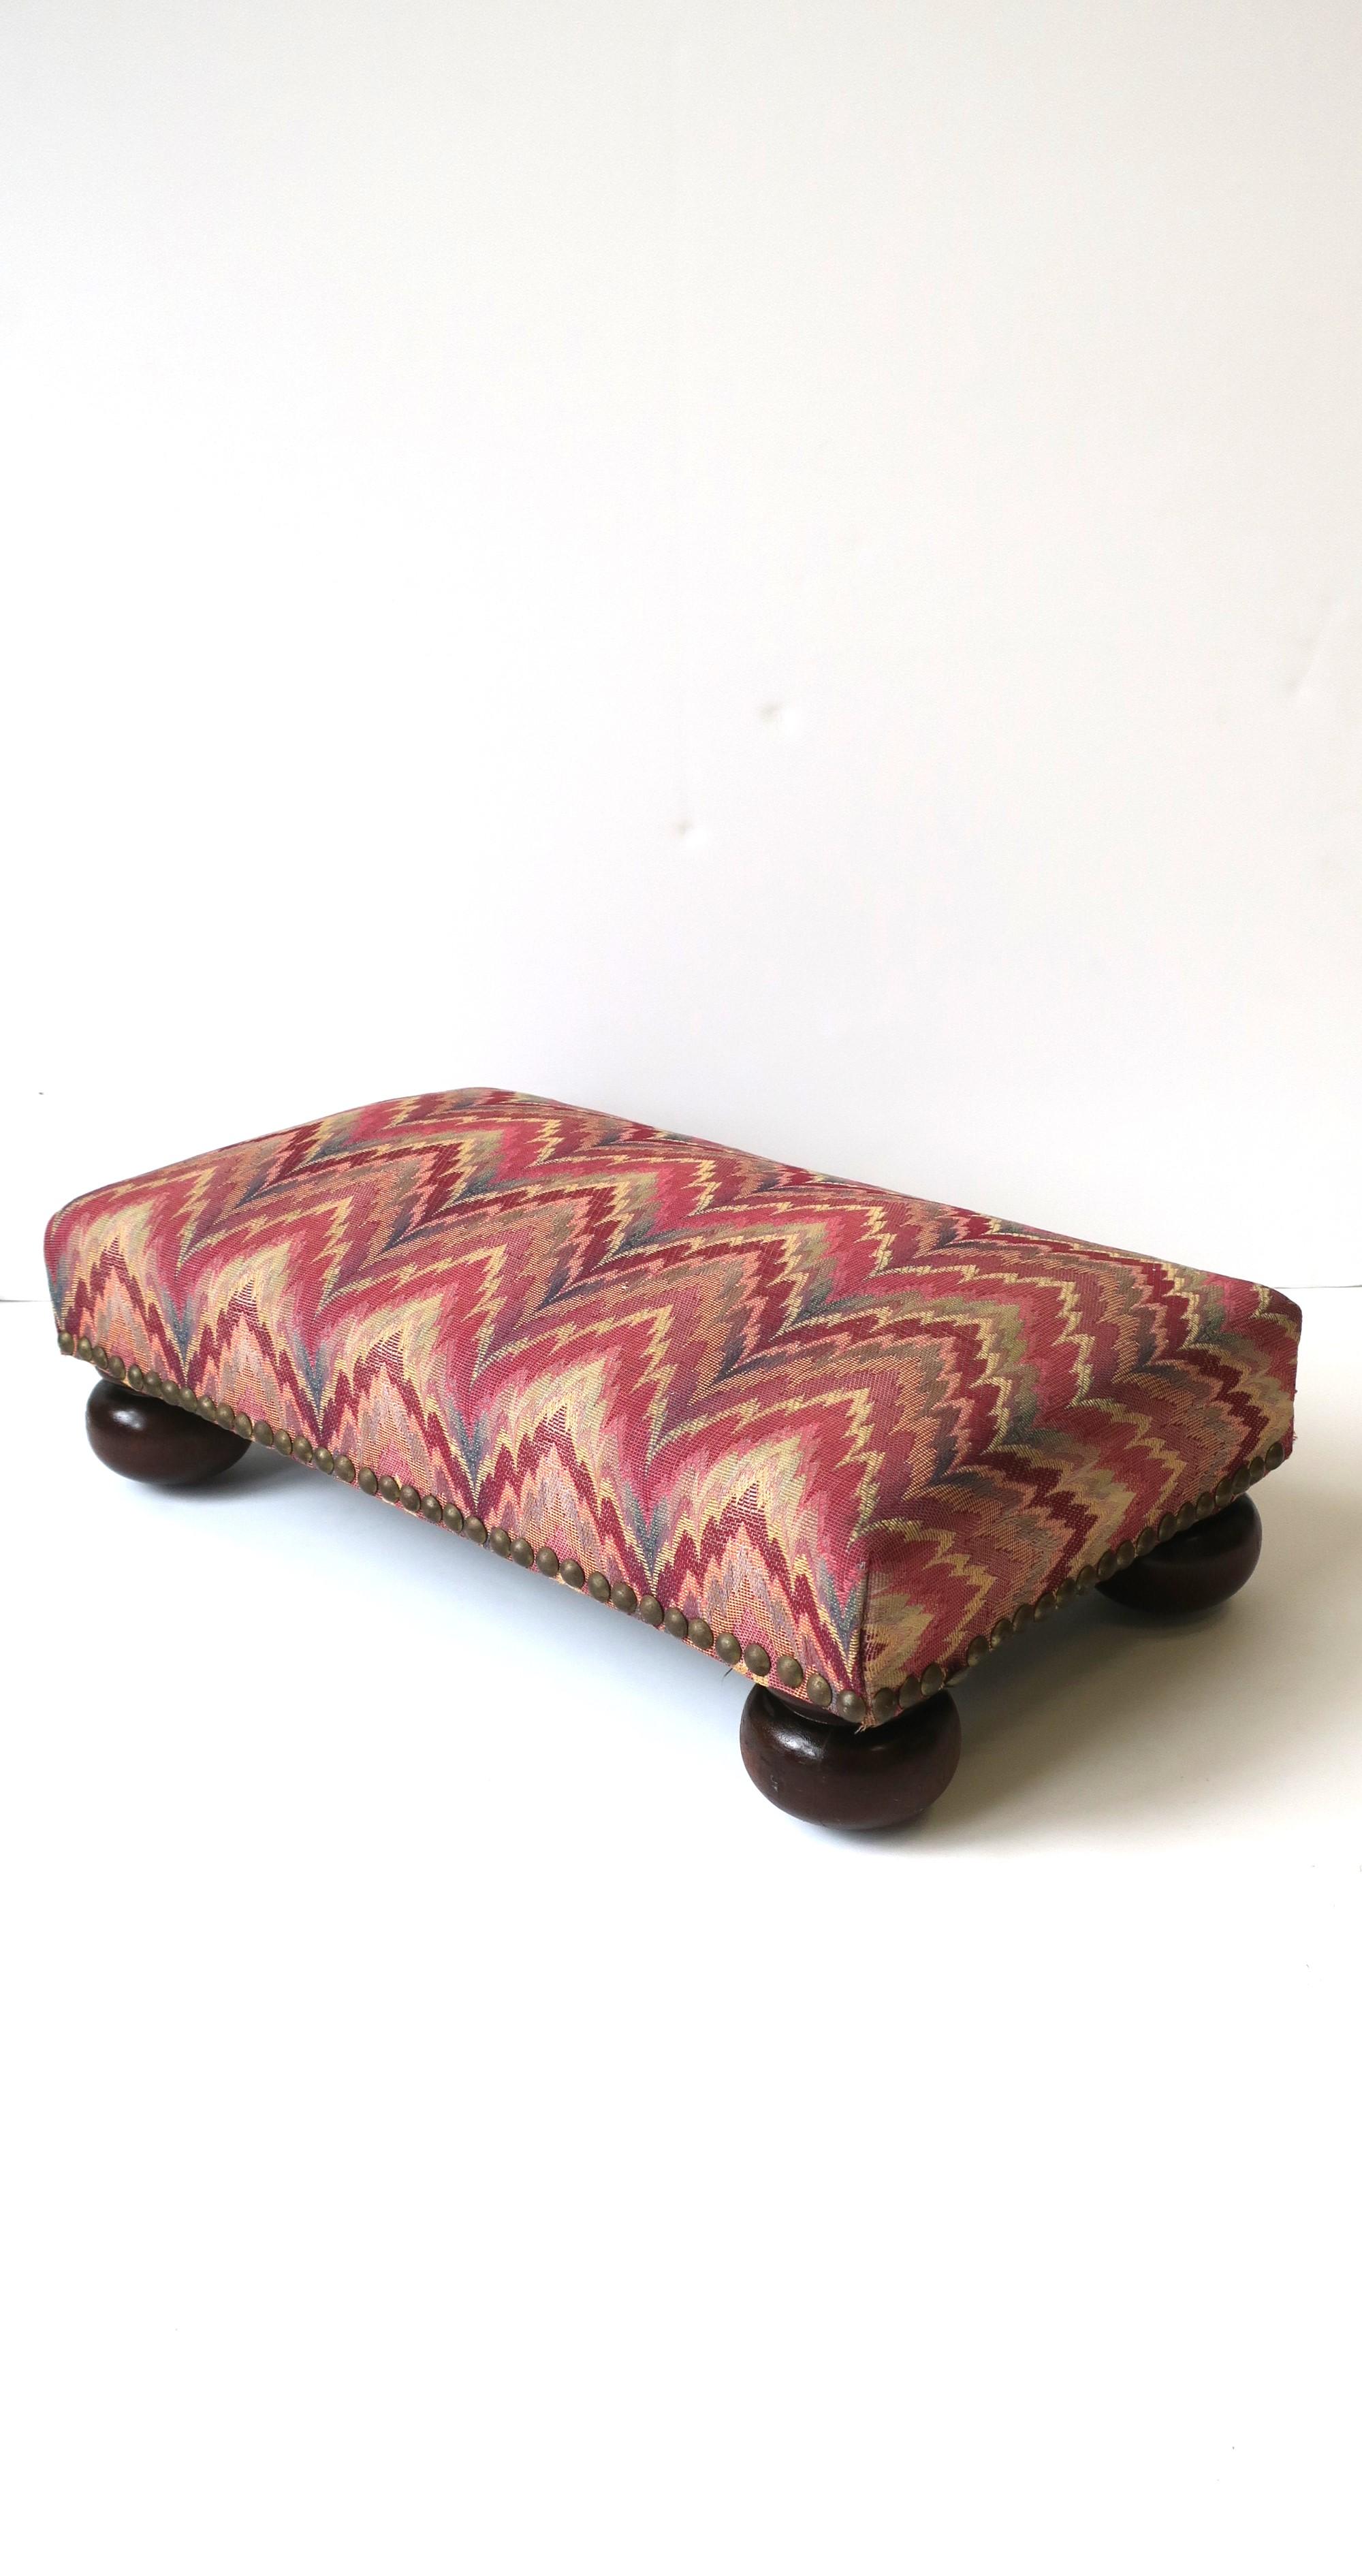 A footstool with rich brown bun feet, upholstered in (possibly) a Schumacher flame-stitch fabric, with brass nail-head design around, circa mid-20th century. Great as a footstool or low bench seat. Piece can also display books, hold a cocktail,